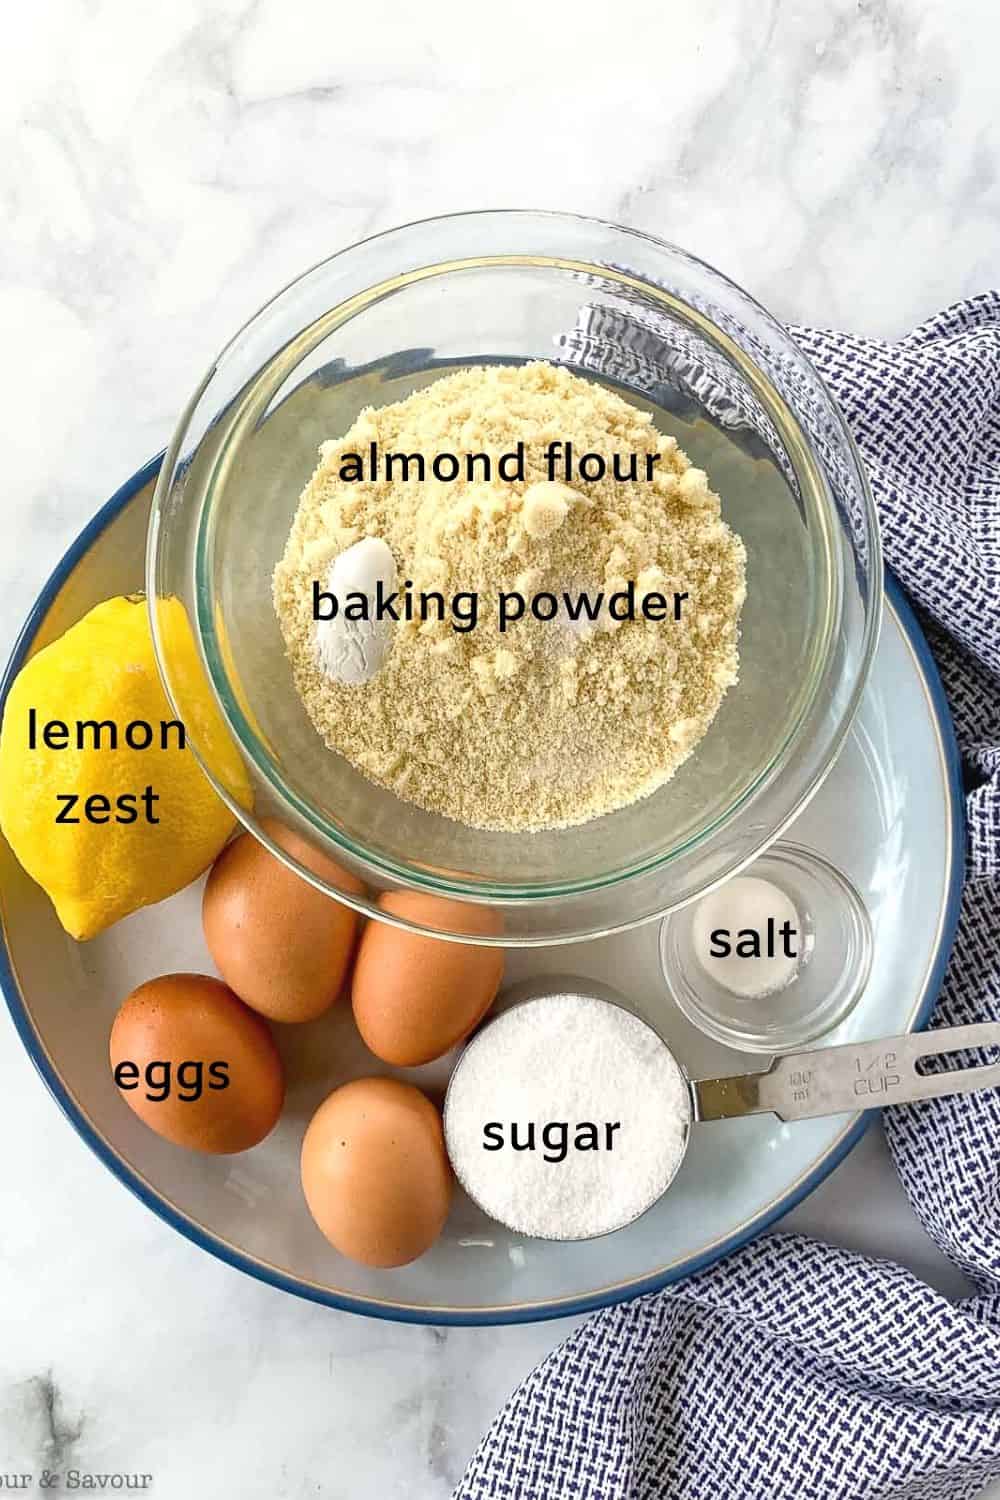 Ingredients for flourless apricot almond cake.